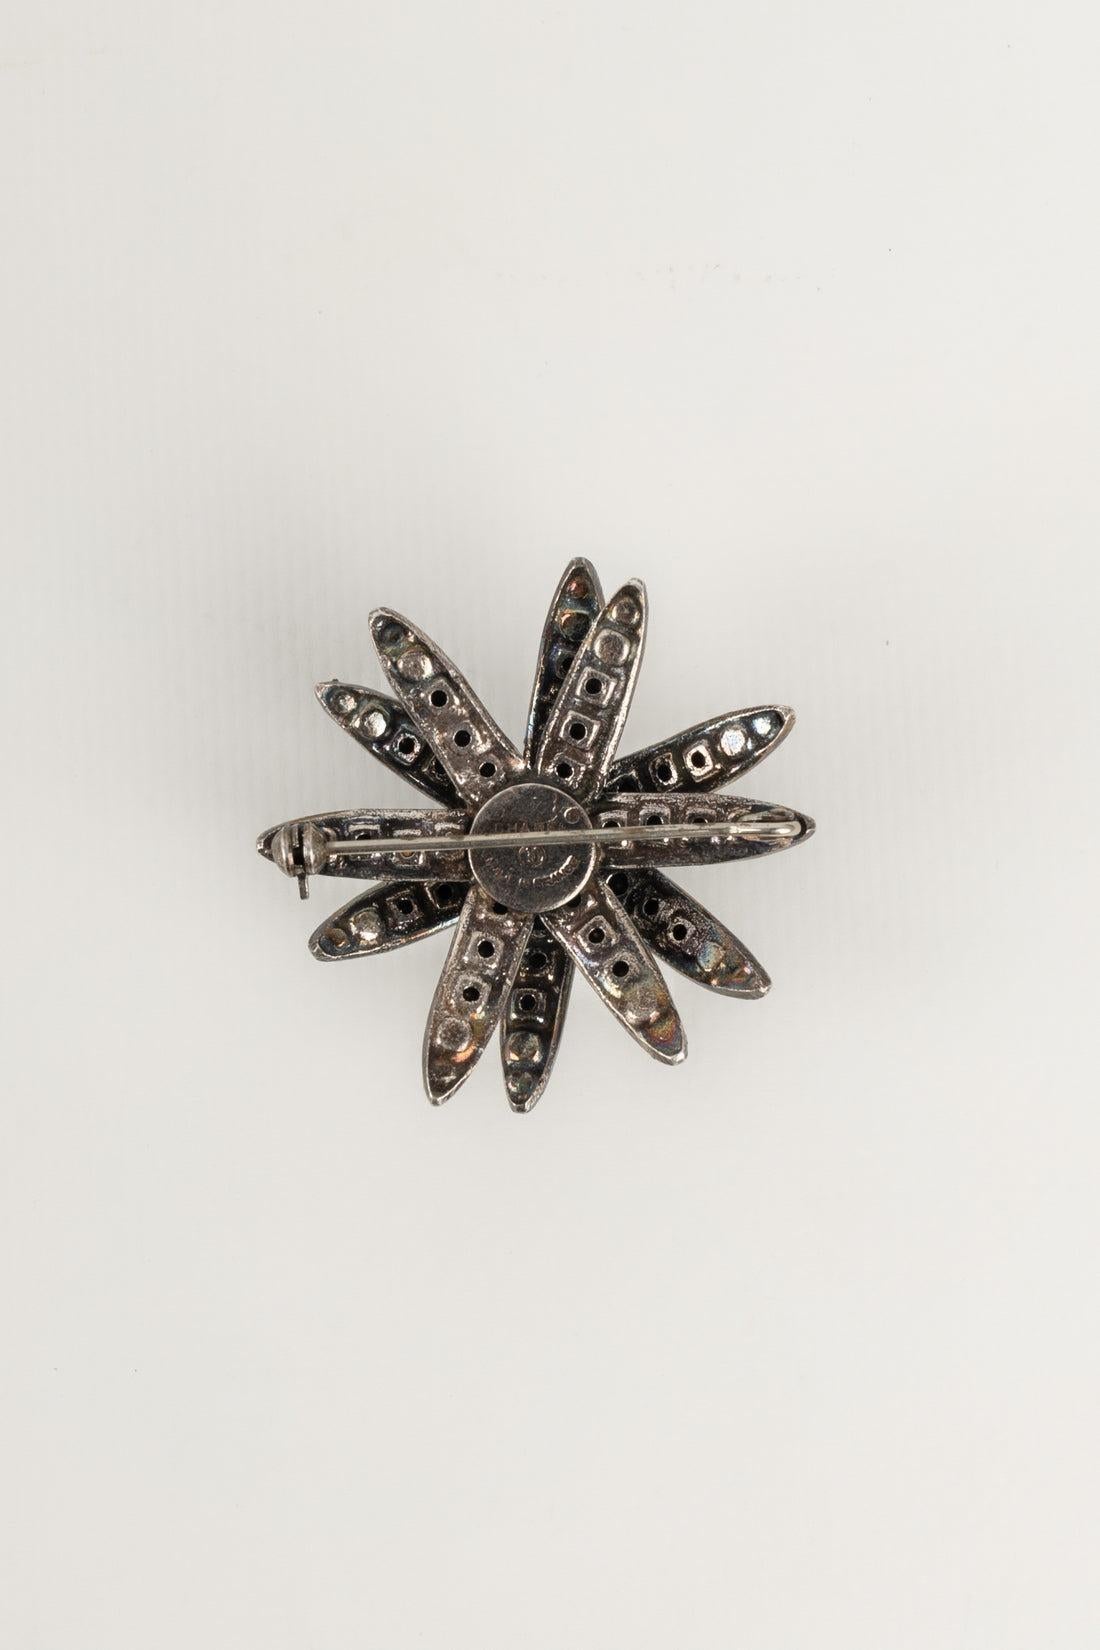 Chanel - (Made in France) Dark silvery metal brooch ornamented with rhinestones.

Additional information:
Condition: Very good condition
Dimensions: Height: 4.5 cm

Seller Reference: BRB72